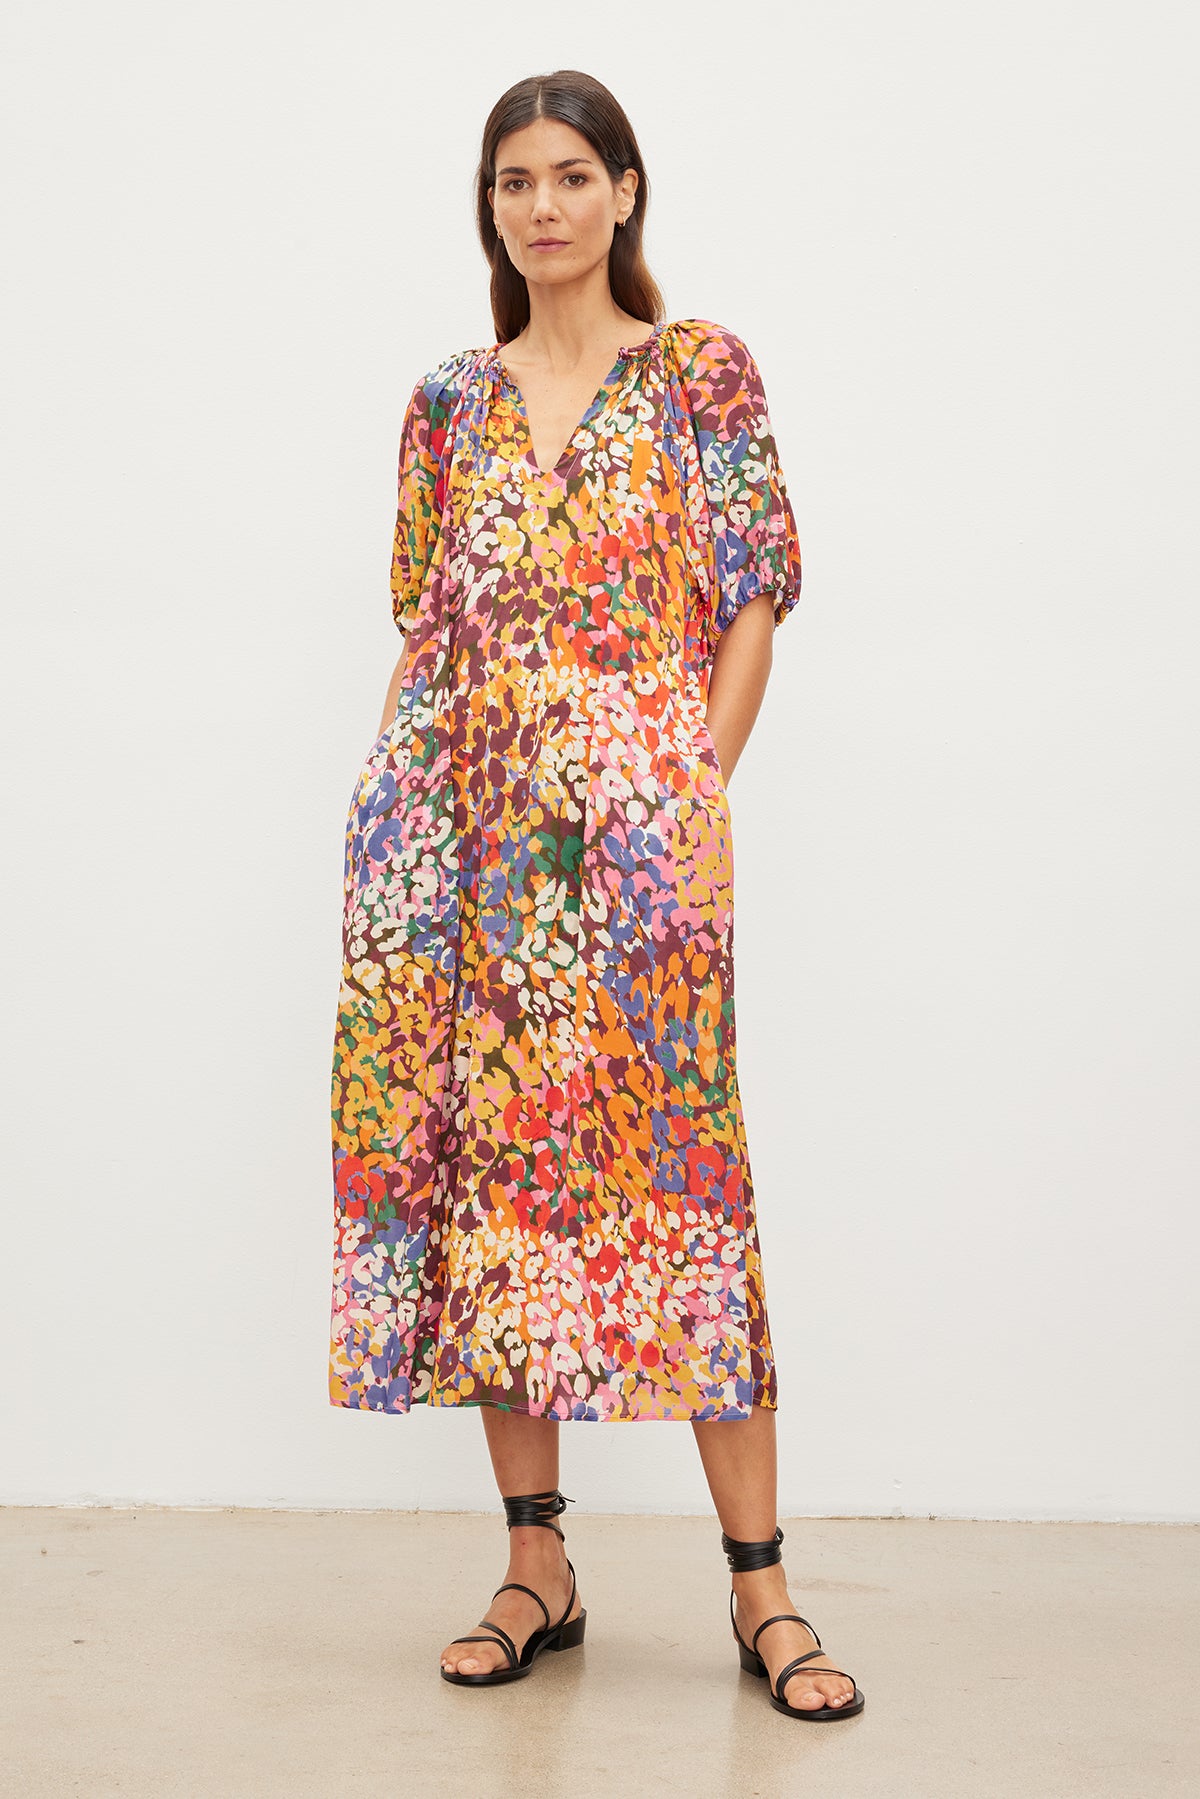 Woman standing in a gallery, wearing a CAROL PRINTED BOHO DRESS by Velvet by Graham & Spencer and black sandals, looking directly at the camera.-35955494158529